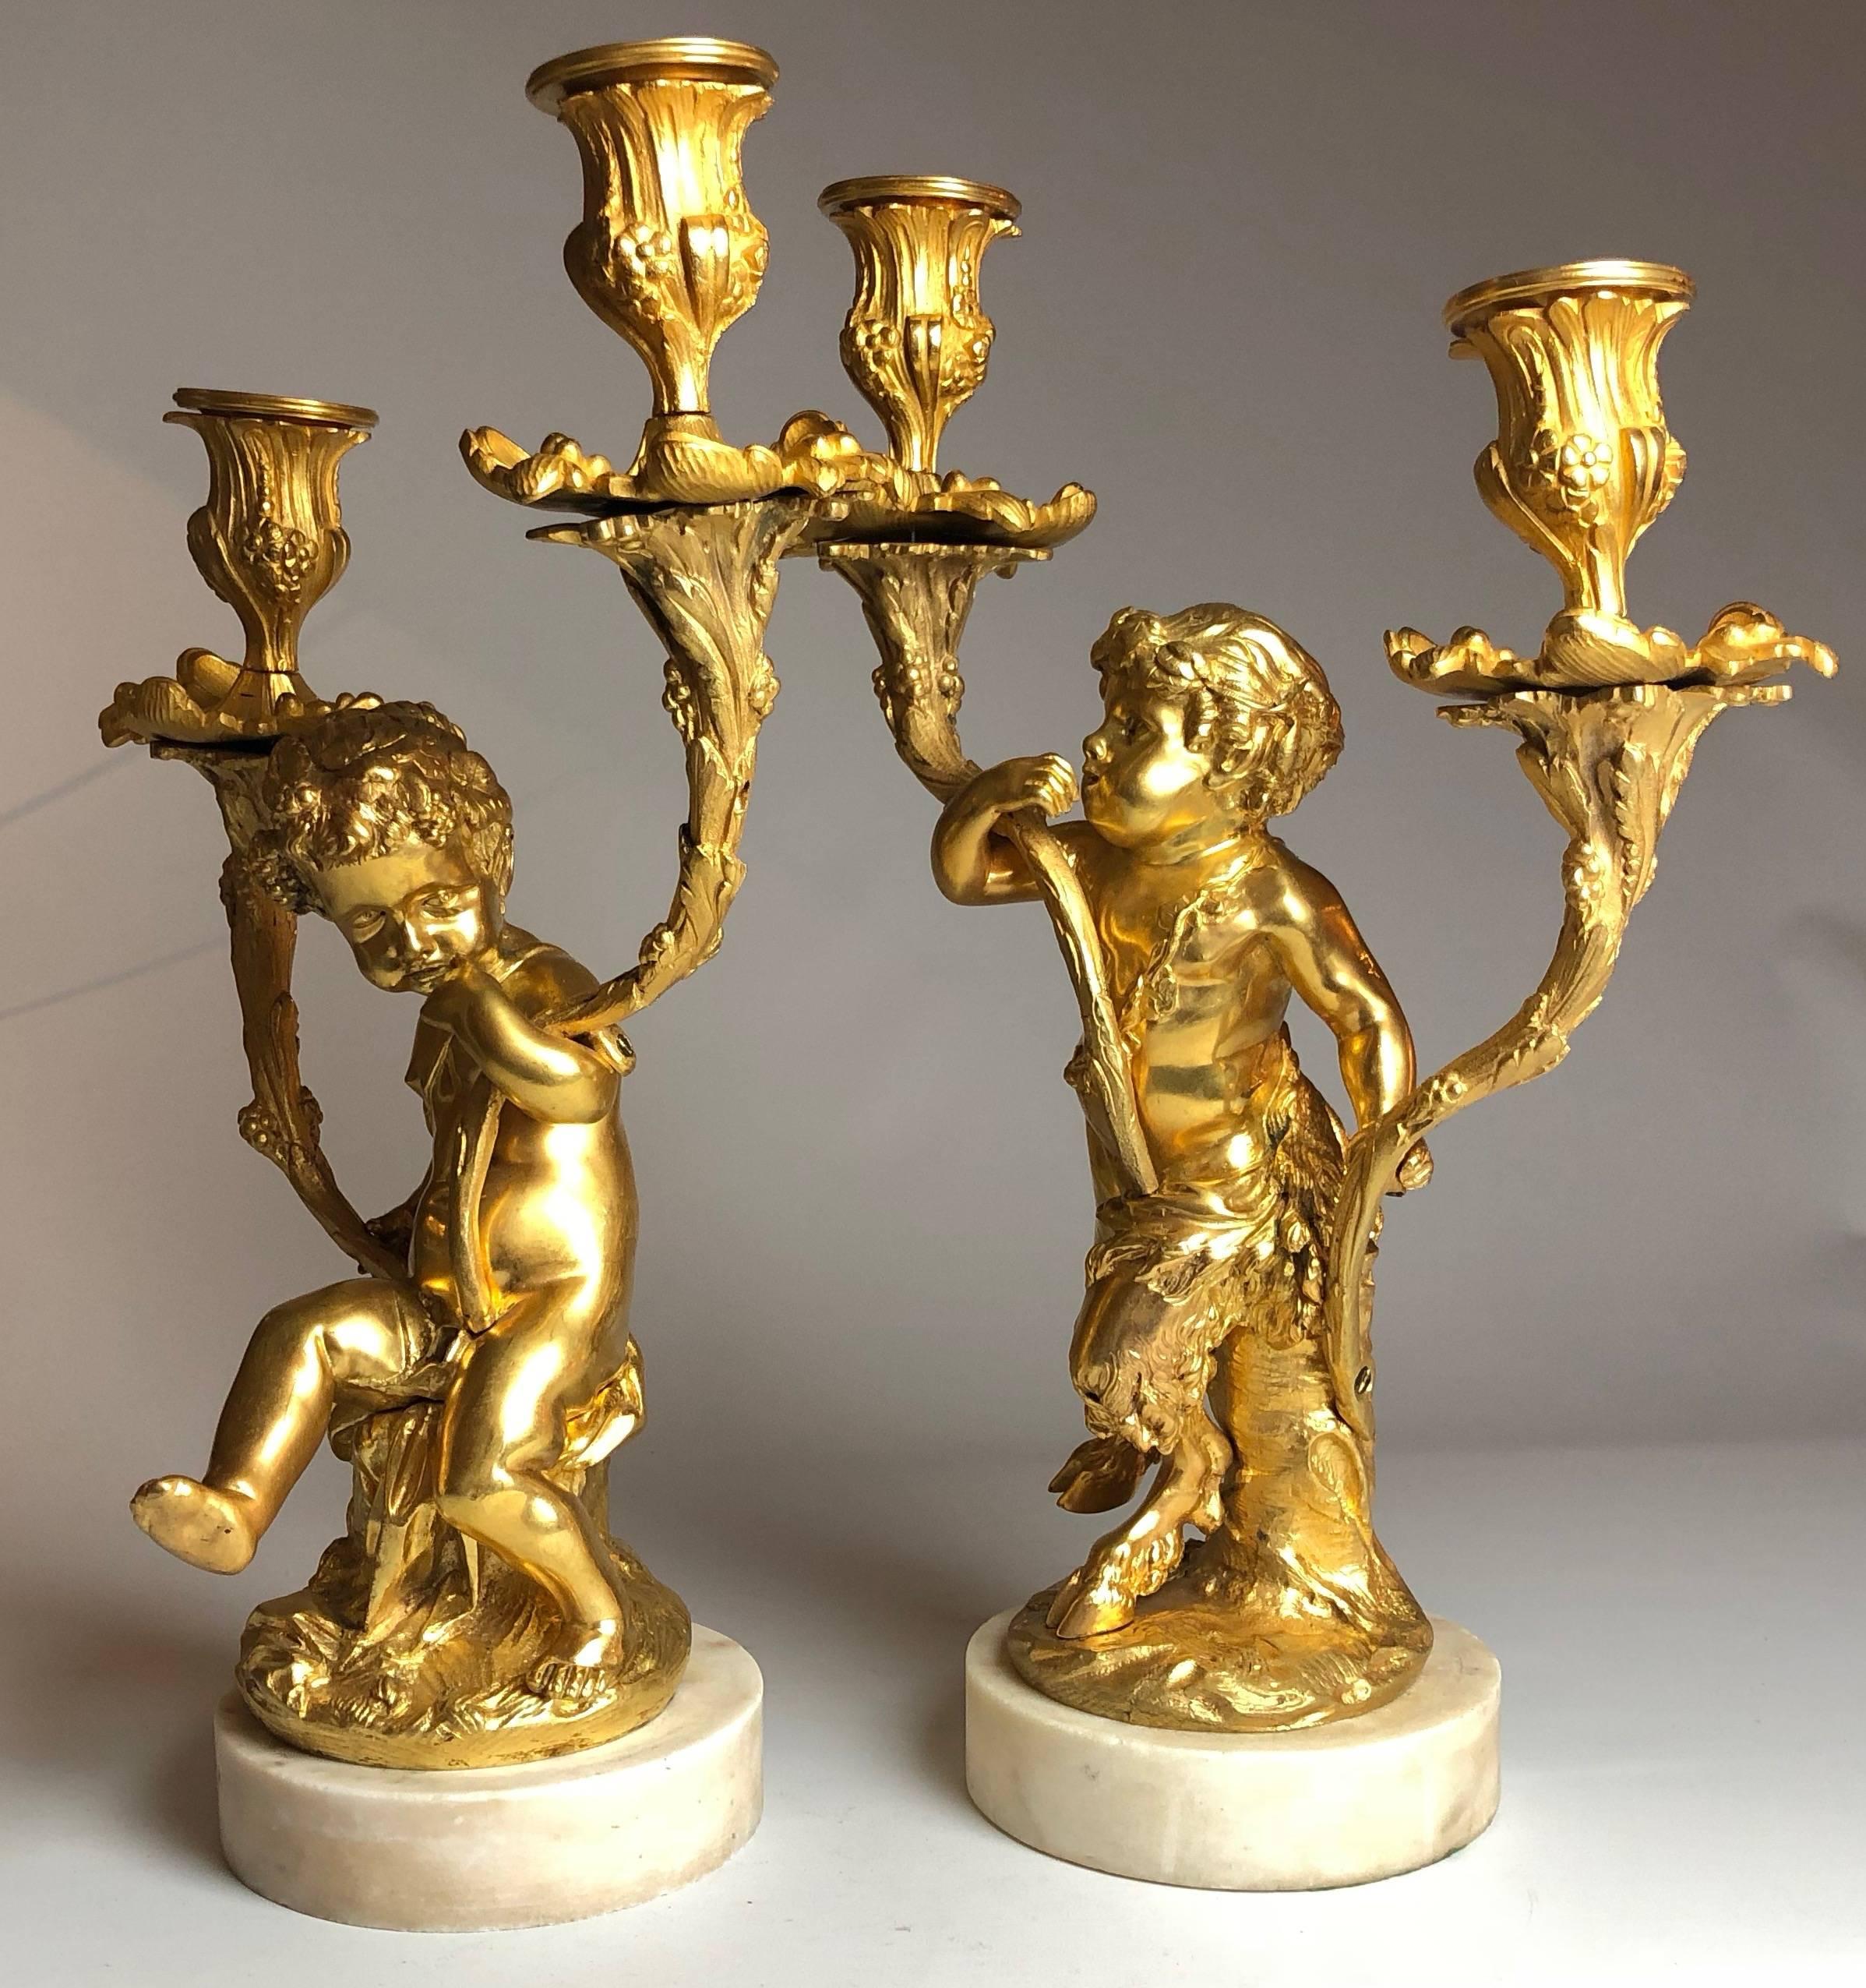 A pair of gilt bronze and white marble two-branch candelabra in the manner of Clodion.

They each stand 11" tall

France CIRCA 1860